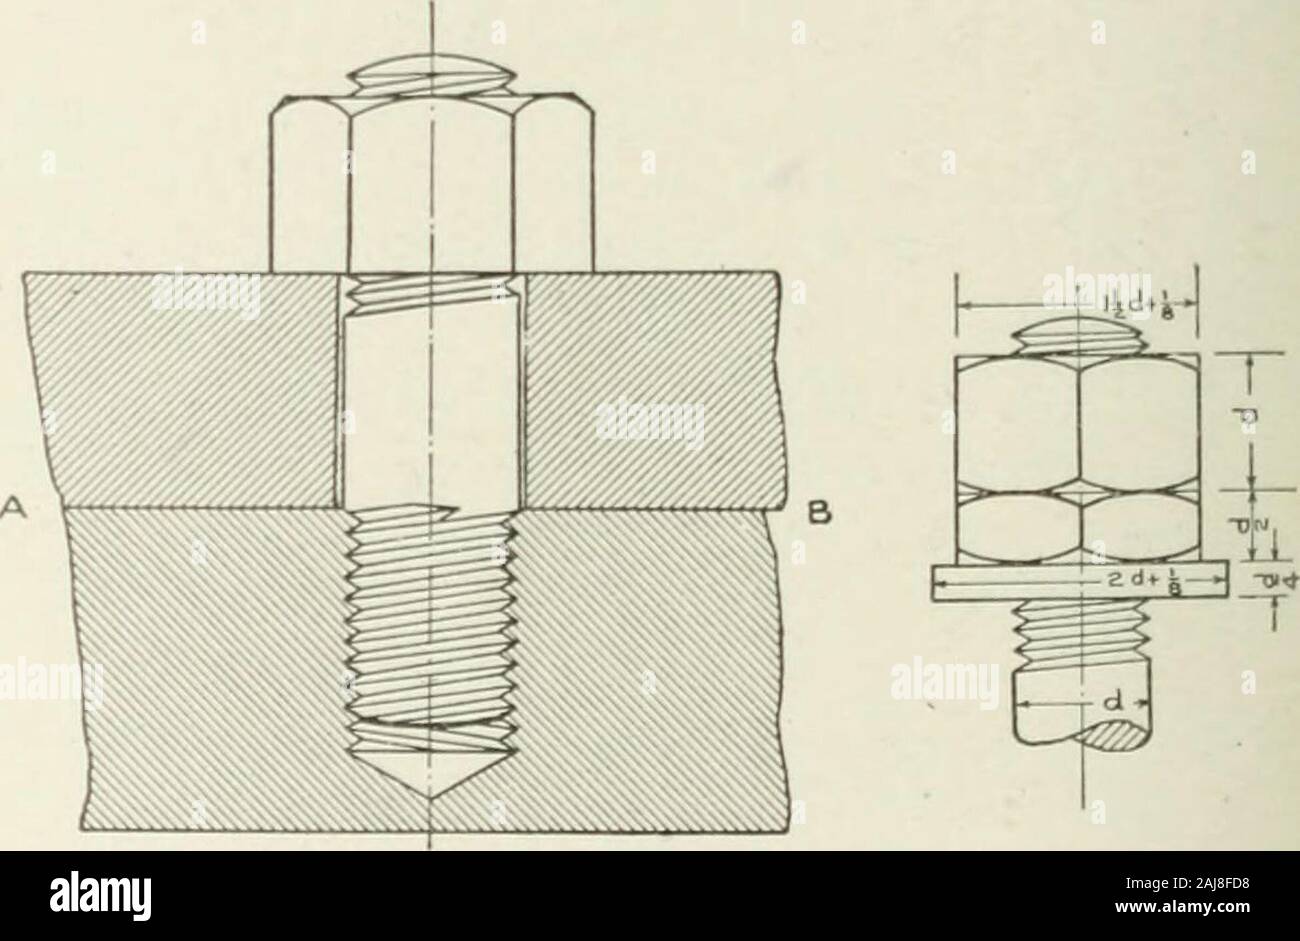 Cyclopedia of mechanical engineering; a general reference work Editor-in-chief Howard Monroe Raymond Assisted by a corps of mechanical engineers, technical experts, and designers of the highest professional standing . Fig. 54. ANALYSIS. A bolt is simply a cyruulrical bar of metal upset at one end to form a head, and having a thread at the other end, Fio-. 54. A stud is a bolt in which the head is replaced by a thread; or it is a cylindrical bar threaded at both ends, usually 150 MACHINE DESIGN having a small plain portion in the middle. Fig. 55. The objectof bolts and studs is to clamp machine Stock Photo